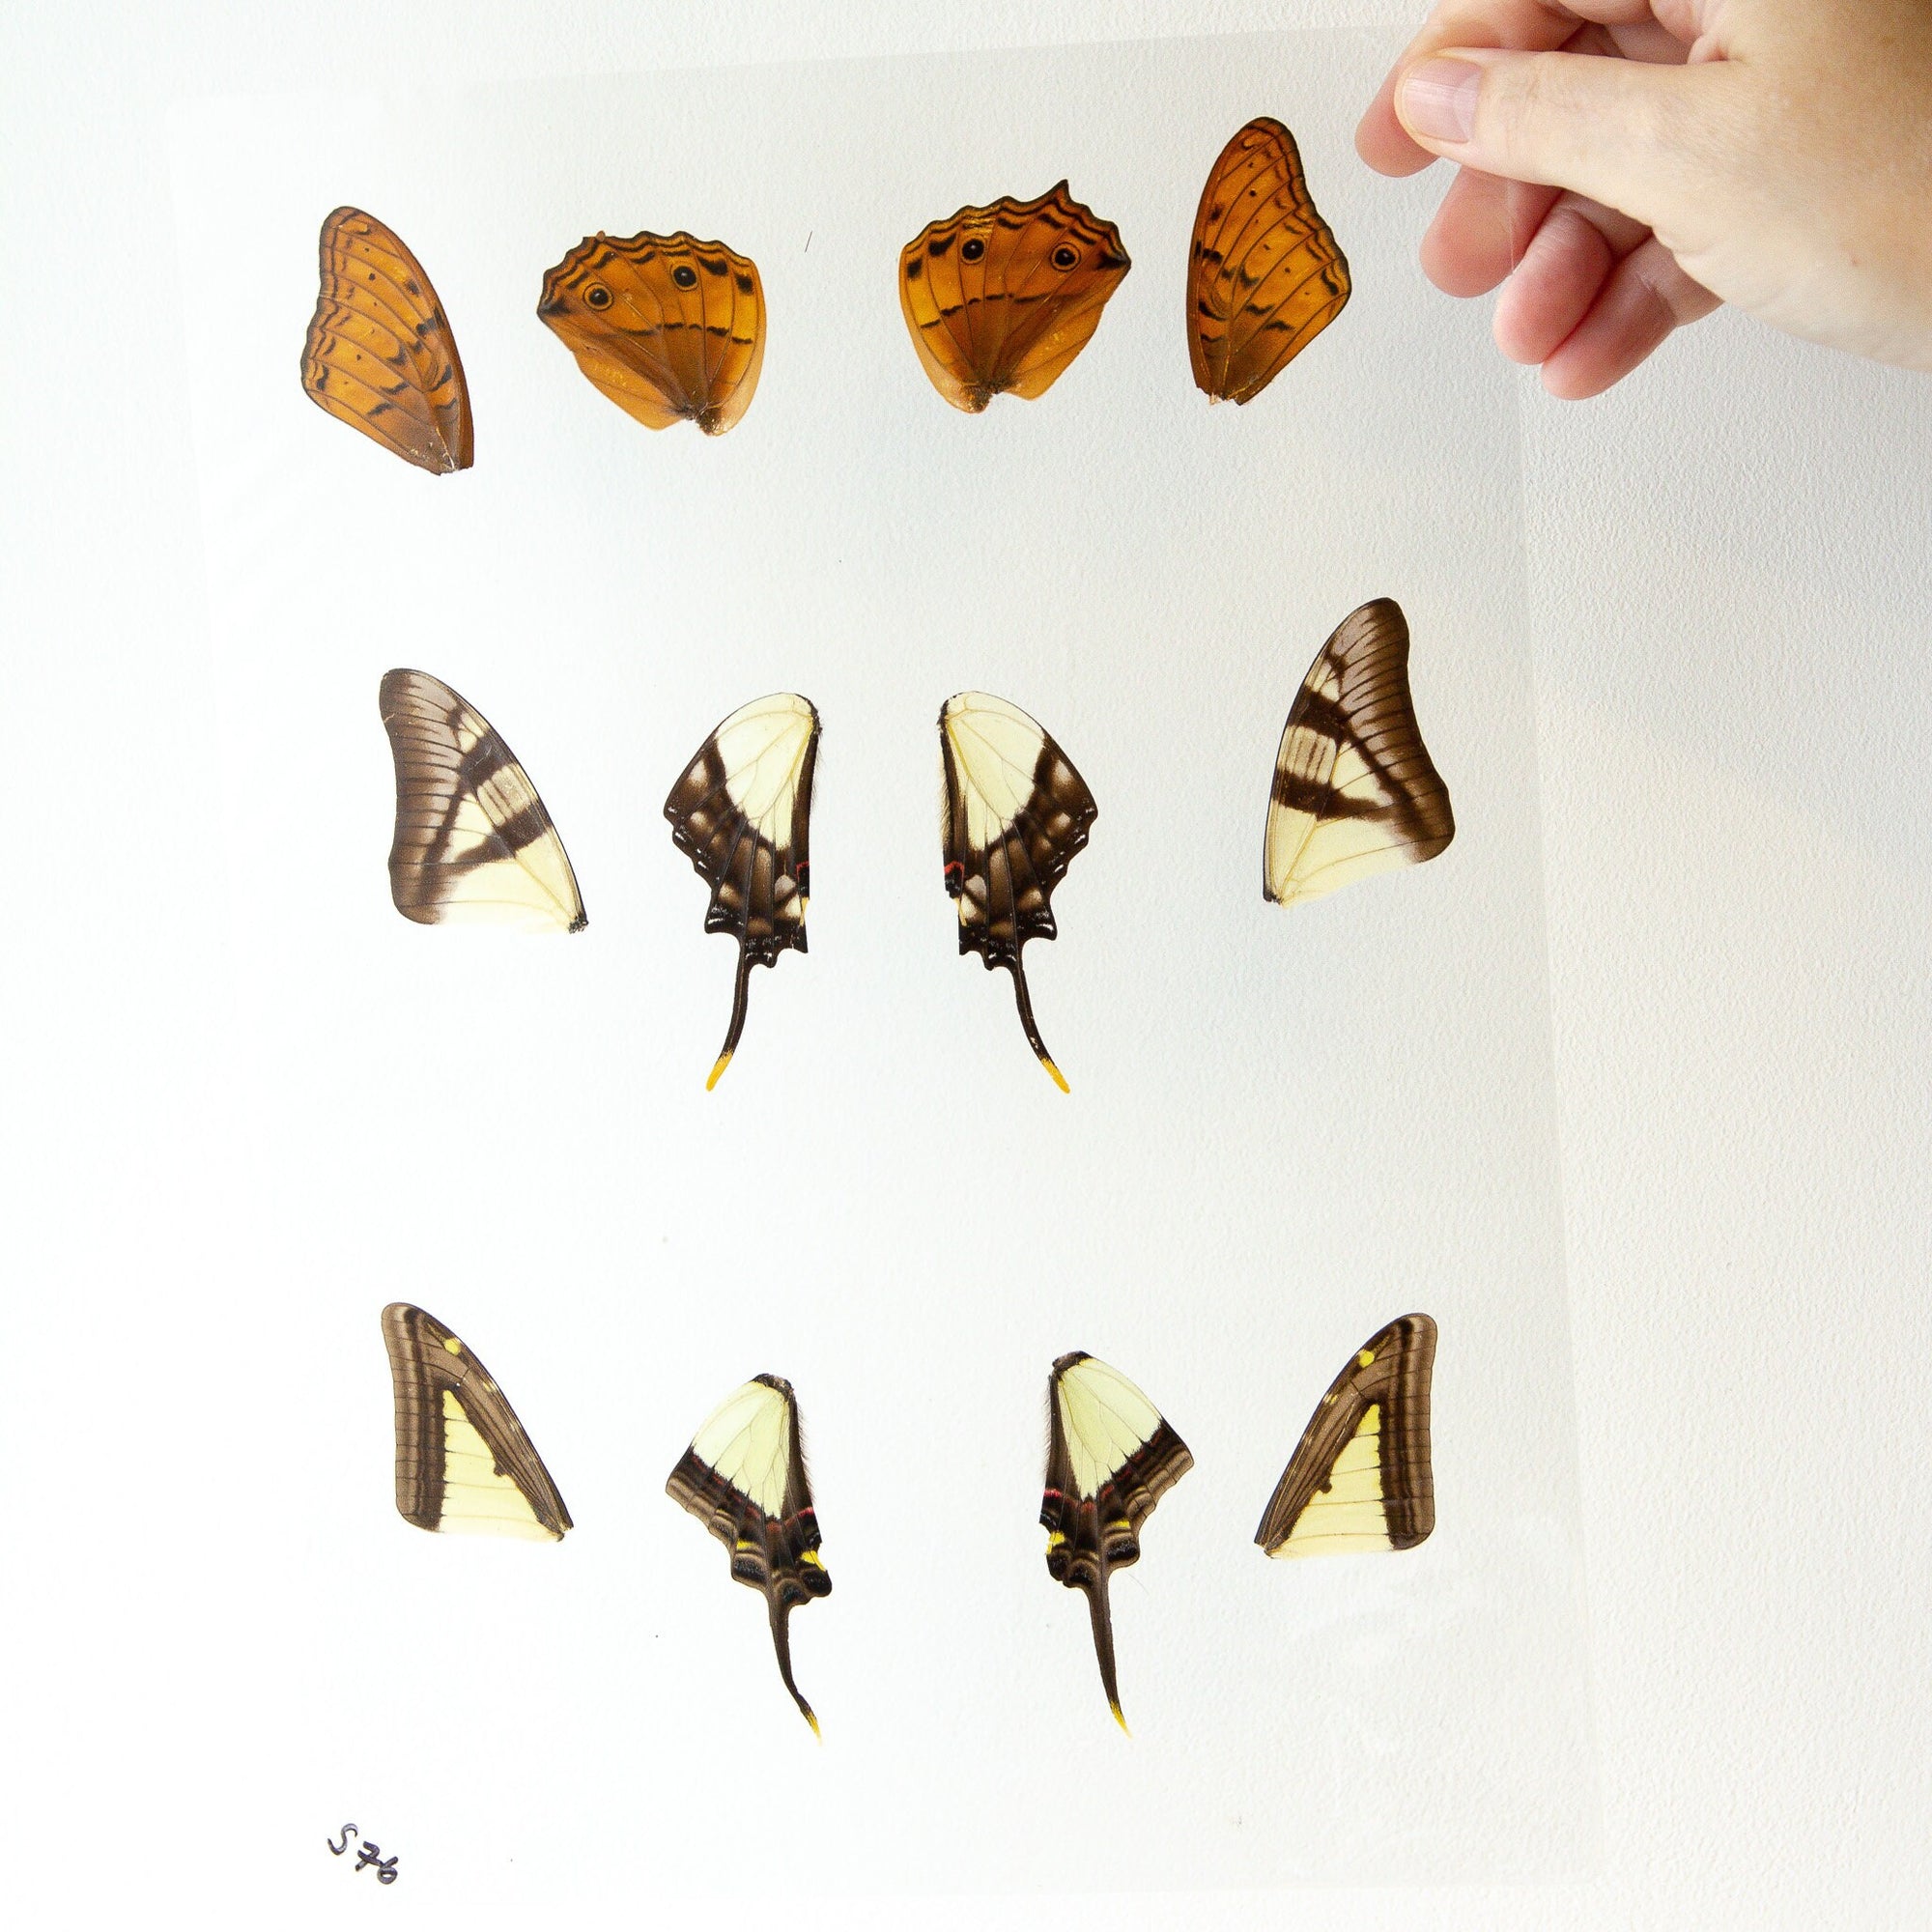 Butterfly Wings GLOSSY LAMINATED SHEET Real Ethically Sourced Specimens Moths Butterflies Wings for Art -- S76